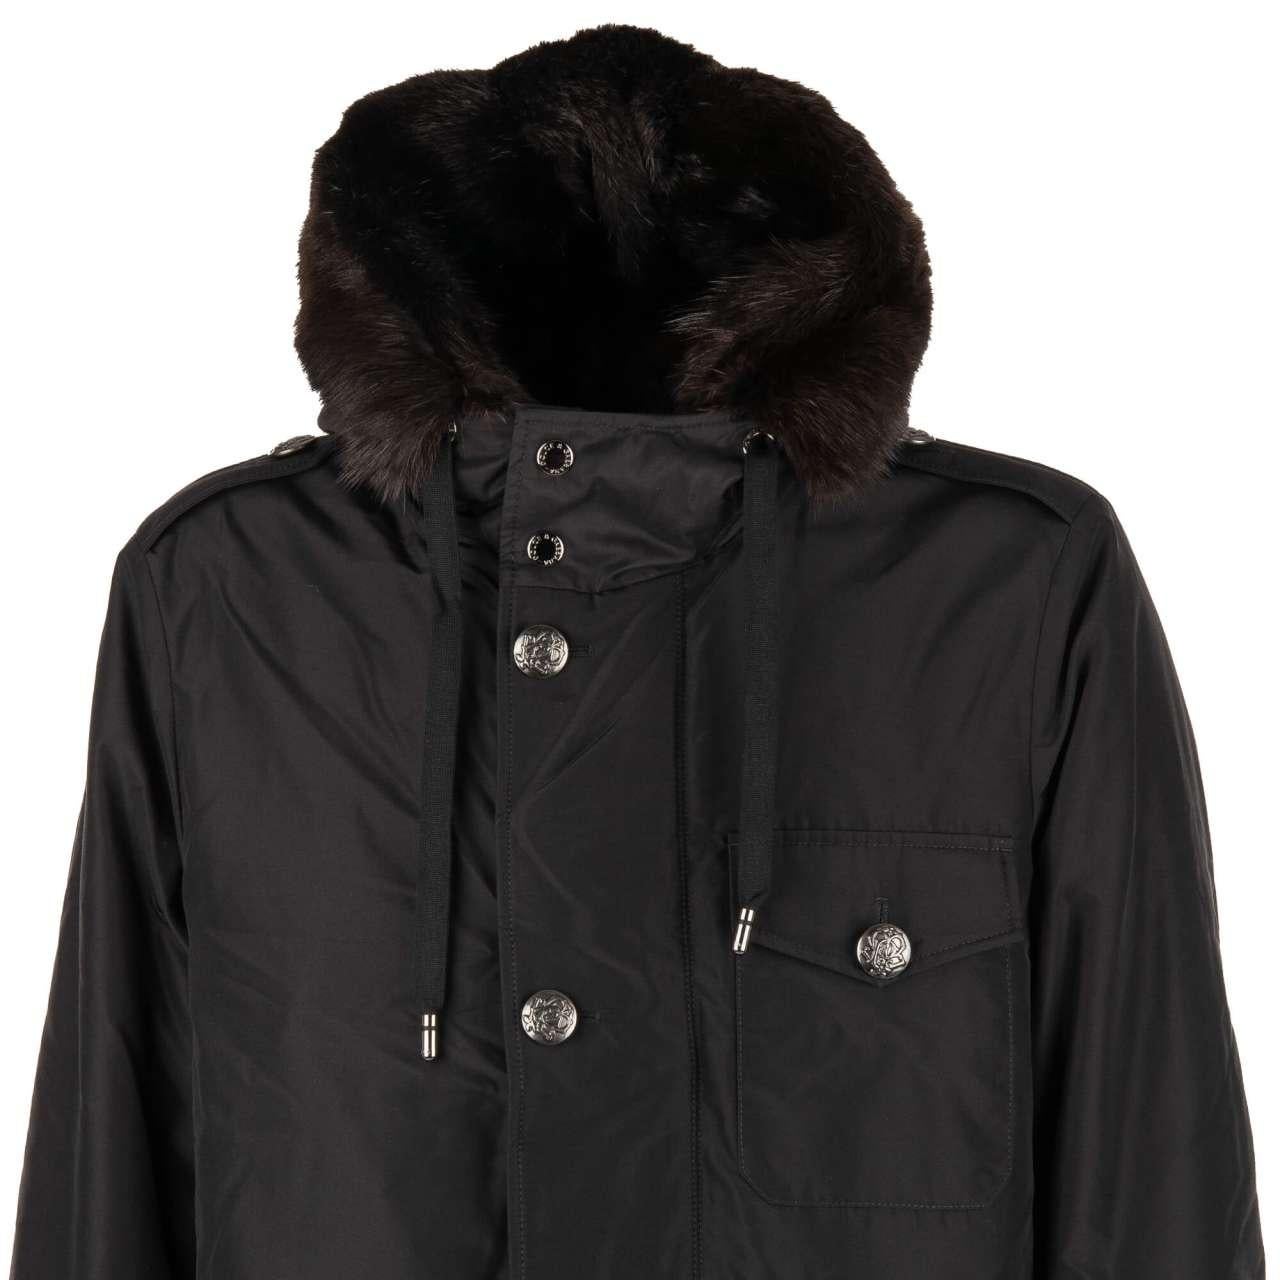 Dolce & Gabbana Silk Parka Jacket with Detachable Fur Lining and Hoody Black 48 For Sale 5